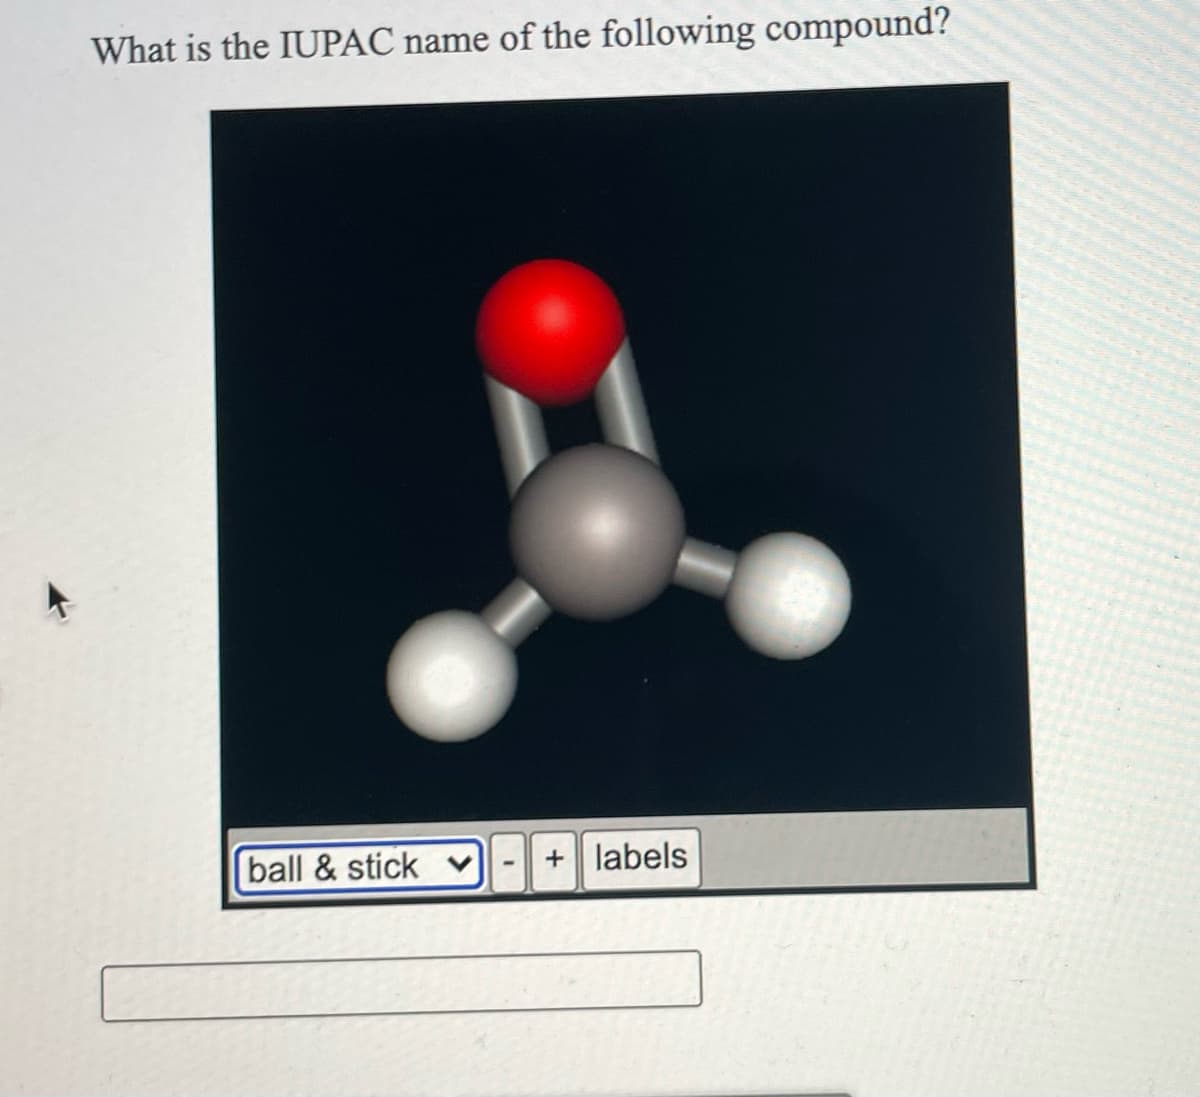 What is the IUPAC name of the following compound?
ball & stick v
+ labels
